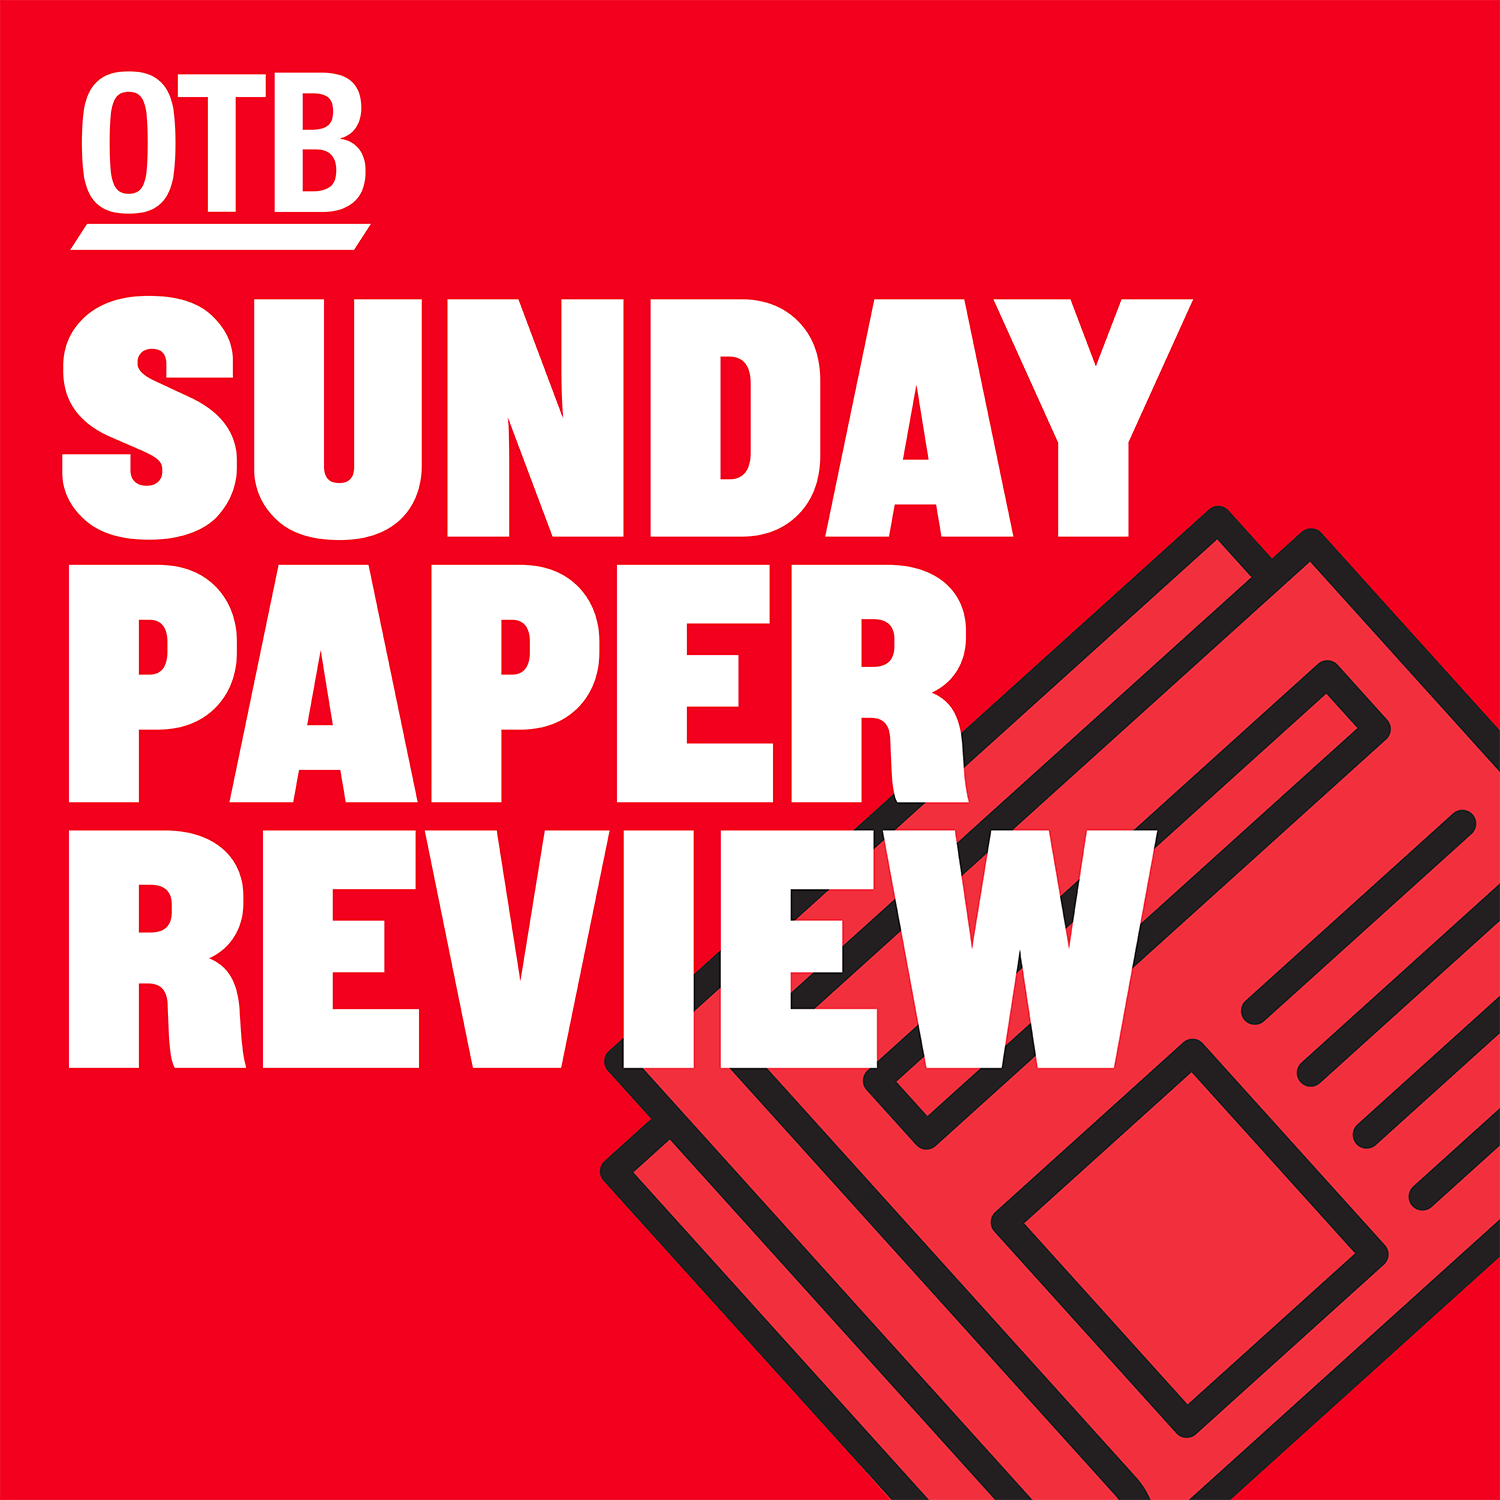 SUNDAY PAPER REVIEW | 'Cocaine is rampant in Irish life' | DAN MCDONNELL & DION FANNING